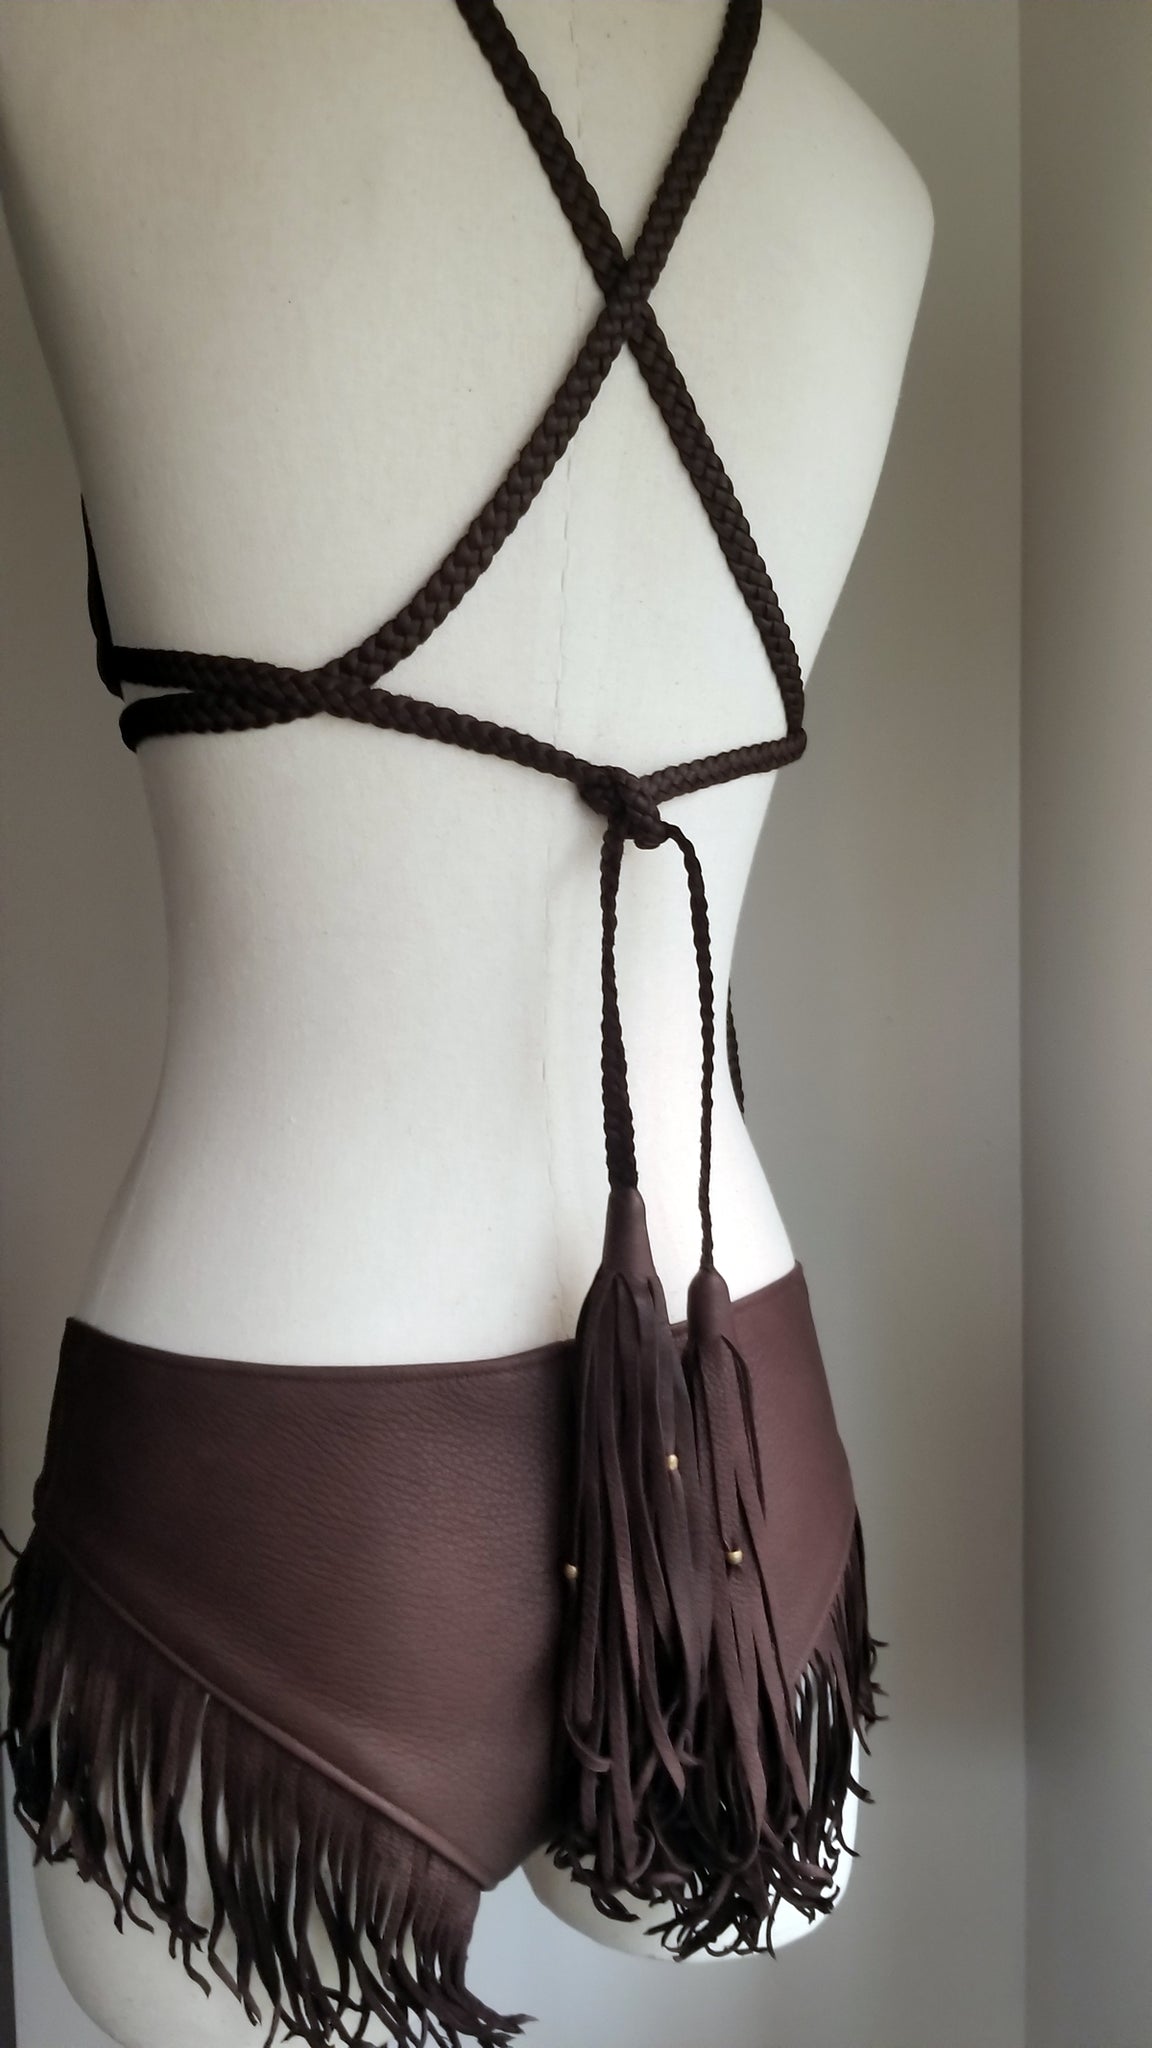 leather bikini set, deerskin leather boy booty shorts bottoms, triangle leather top with braided leather ties and straps, tassels and african beads, chocolate brown on mannequin